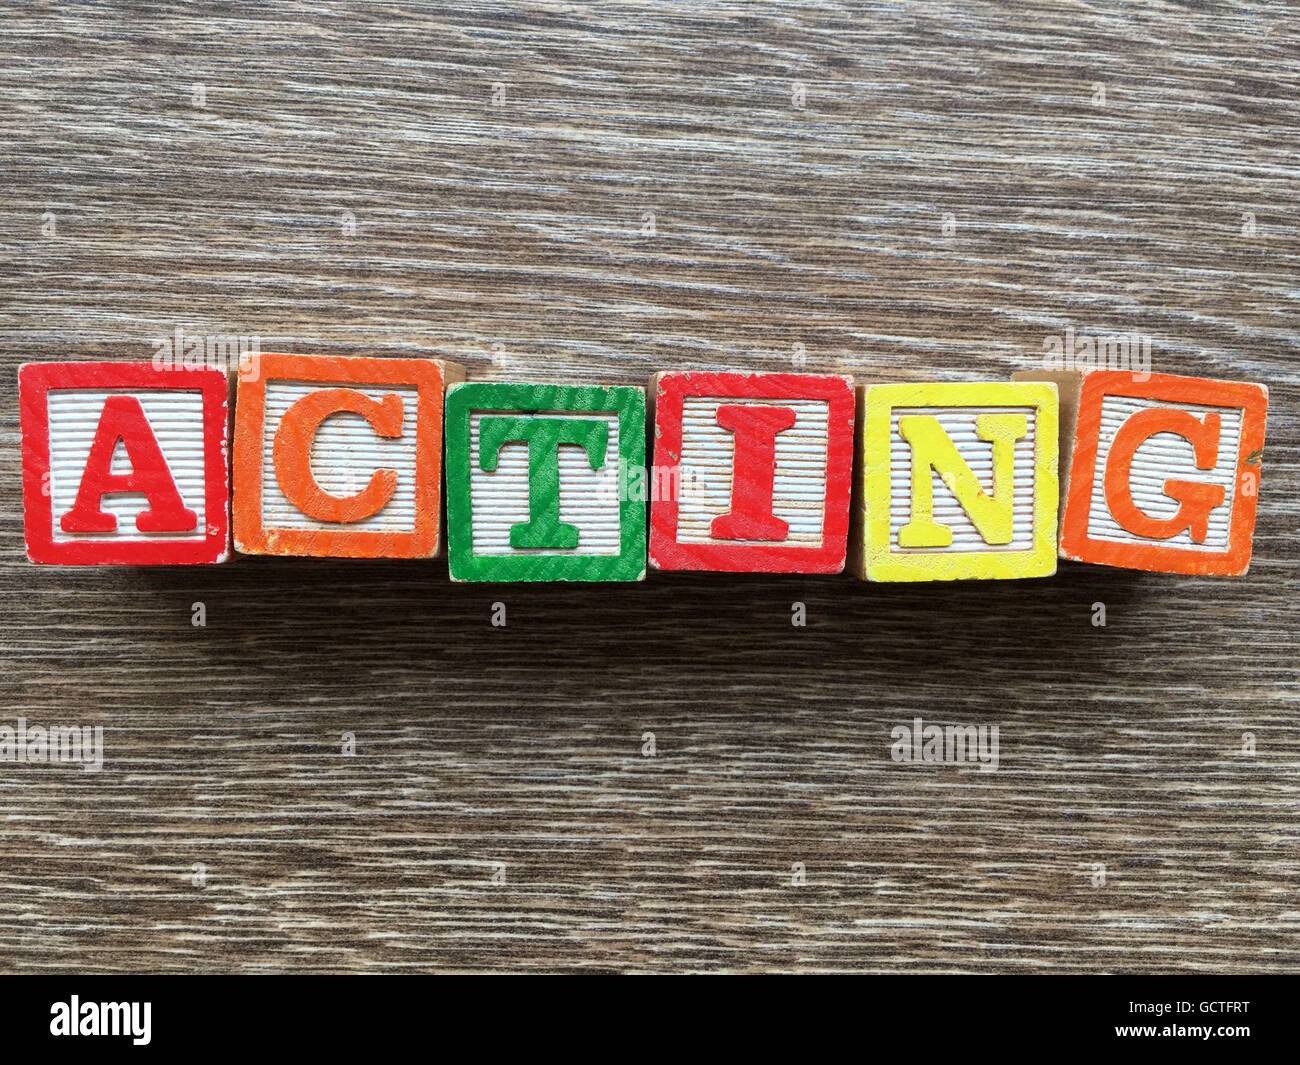 ACTING word written with wood block letter toys Stock Photo